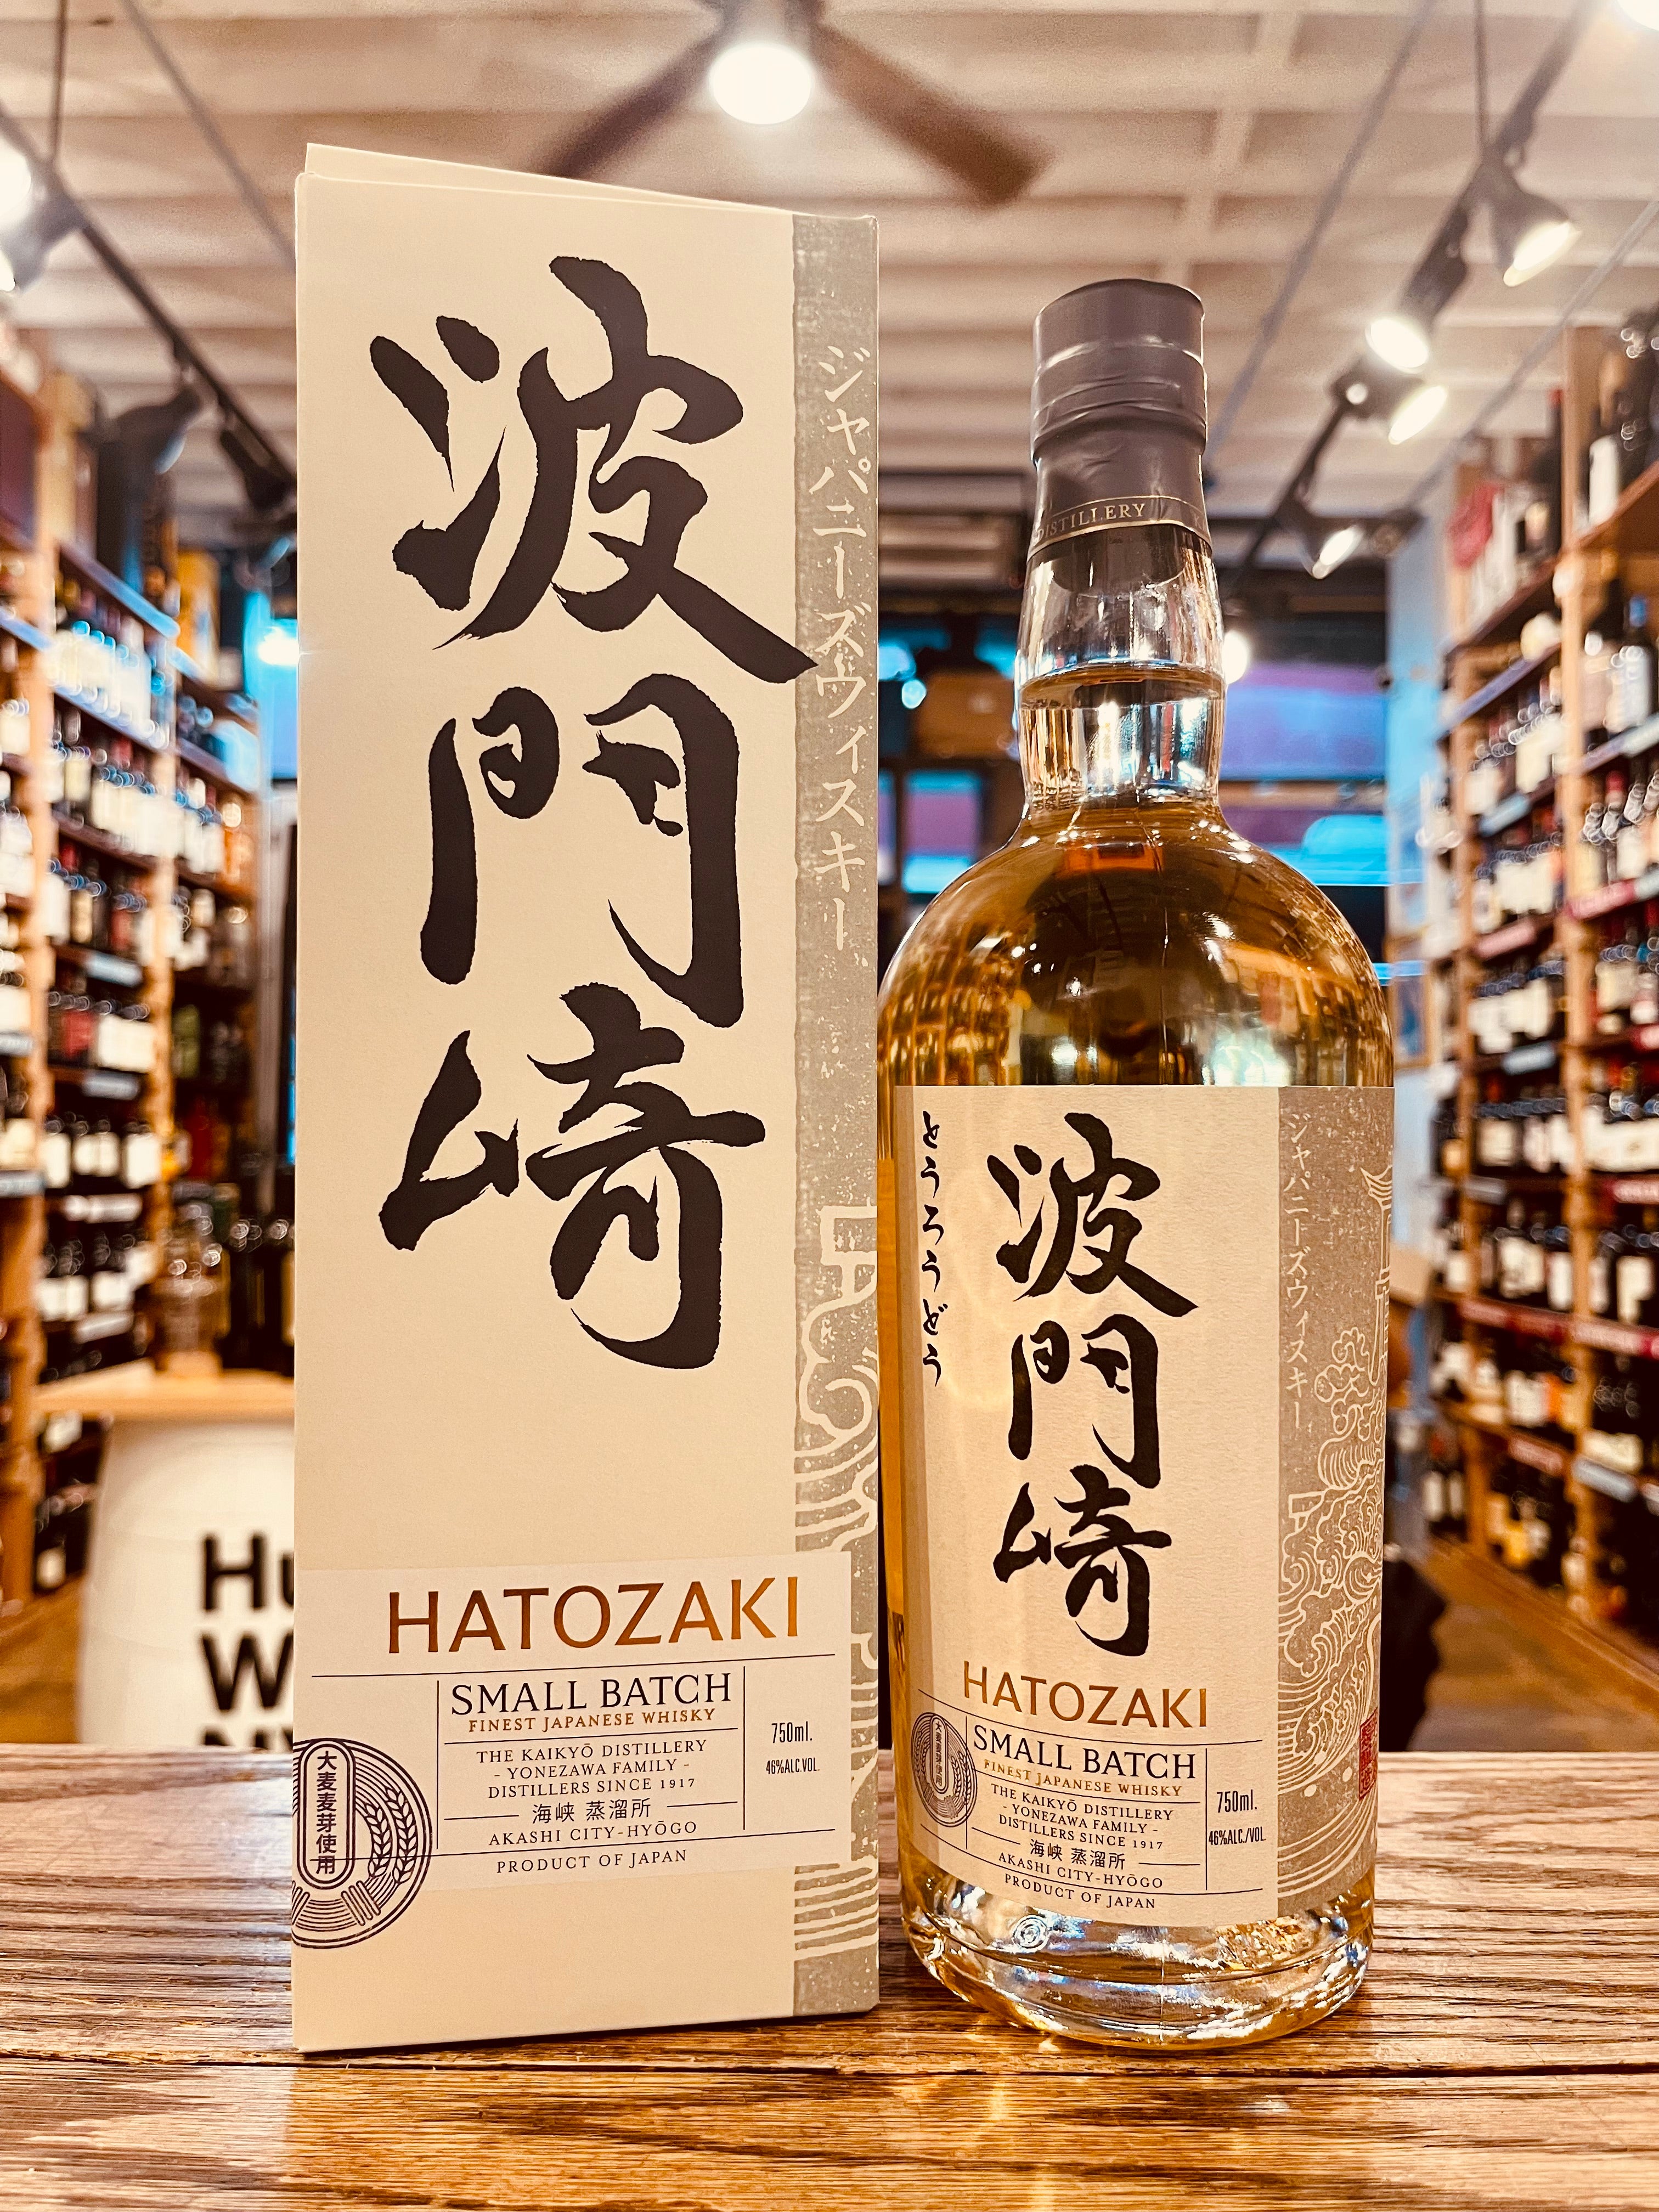 Hatozaki Small Batch Japanese Whisky 750mL a tall squared white box with black Japanese symbols on it next to a tall rounded shouldered clear bottle with a white label and Japanese symbols on it.